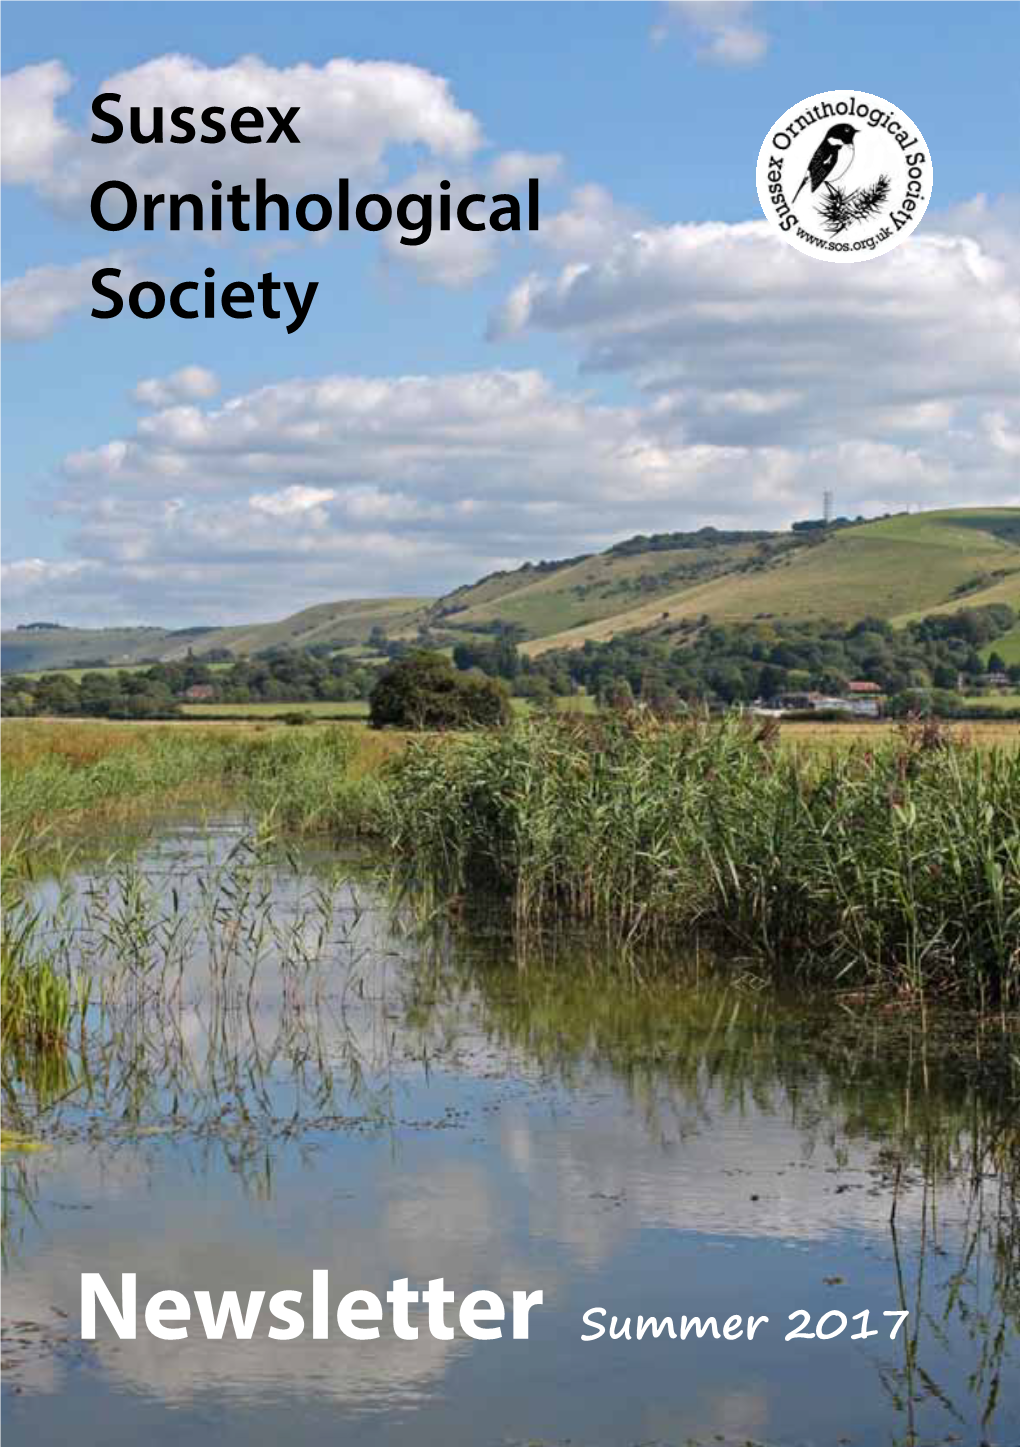 Newsletter Summer 2017 Sussex Ornithological Society - Registered Charity No